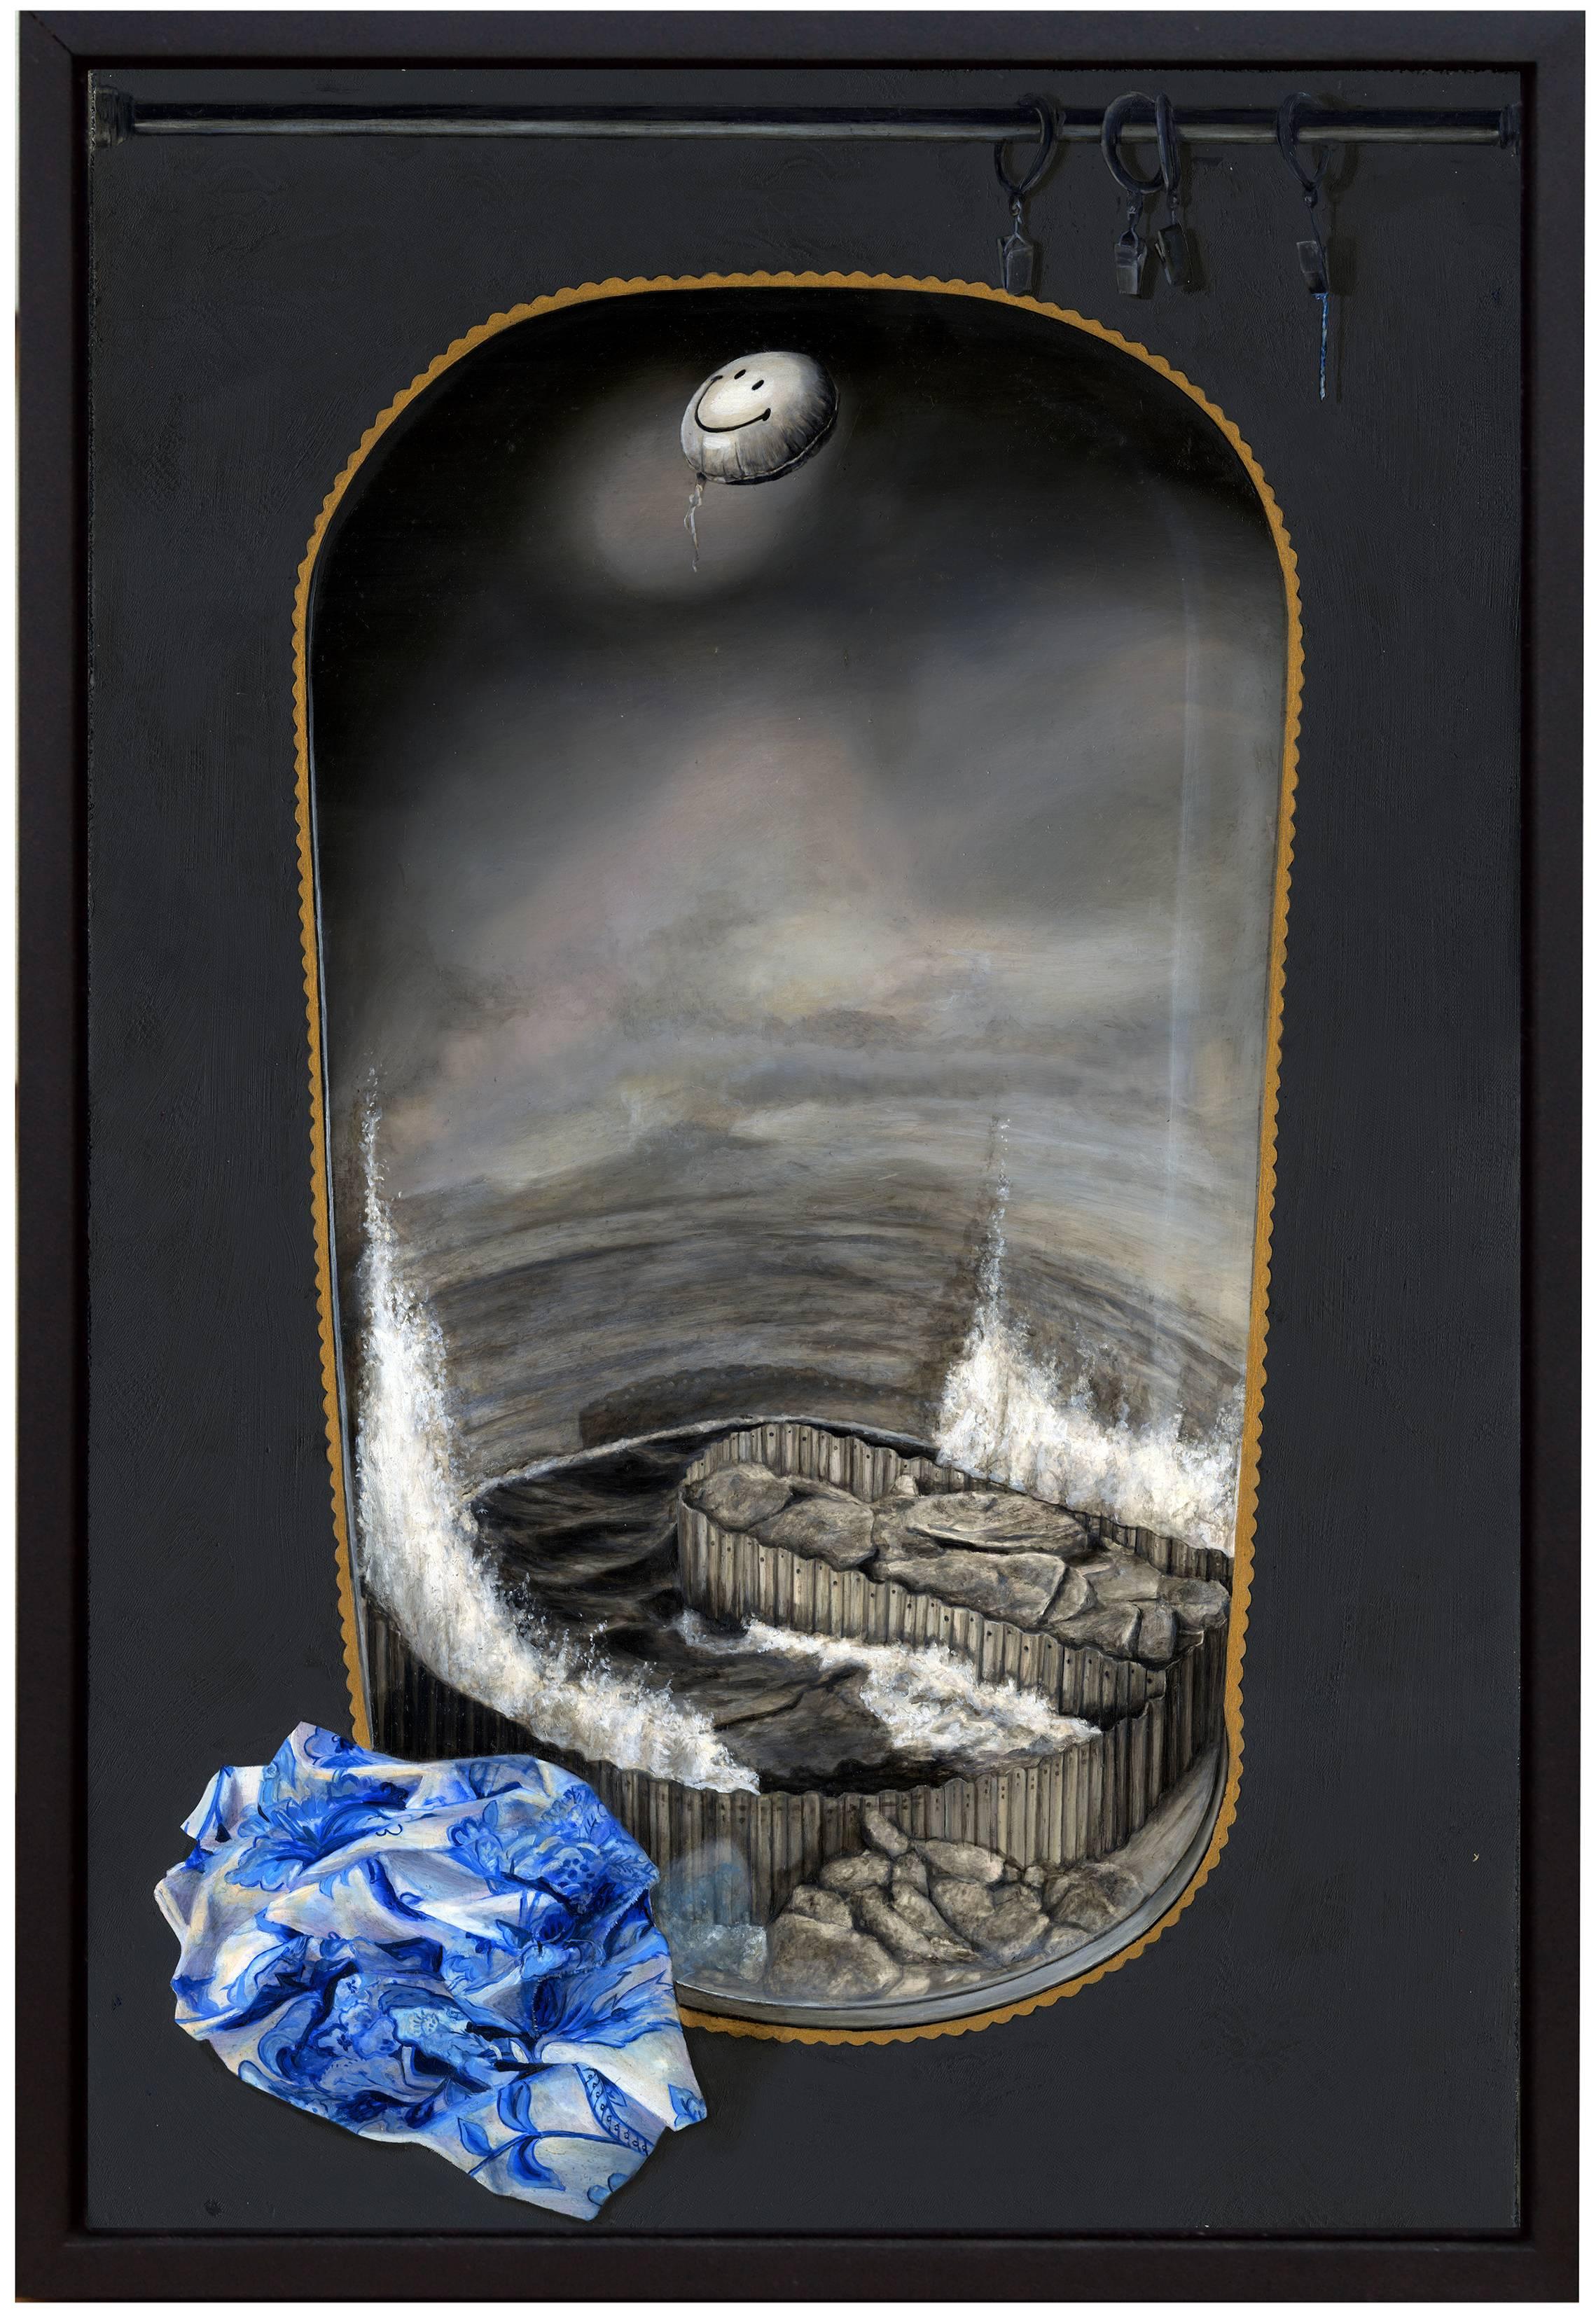 Yes, But Does It Float - Original Surreal Oil Painting with Symbolic Imagery